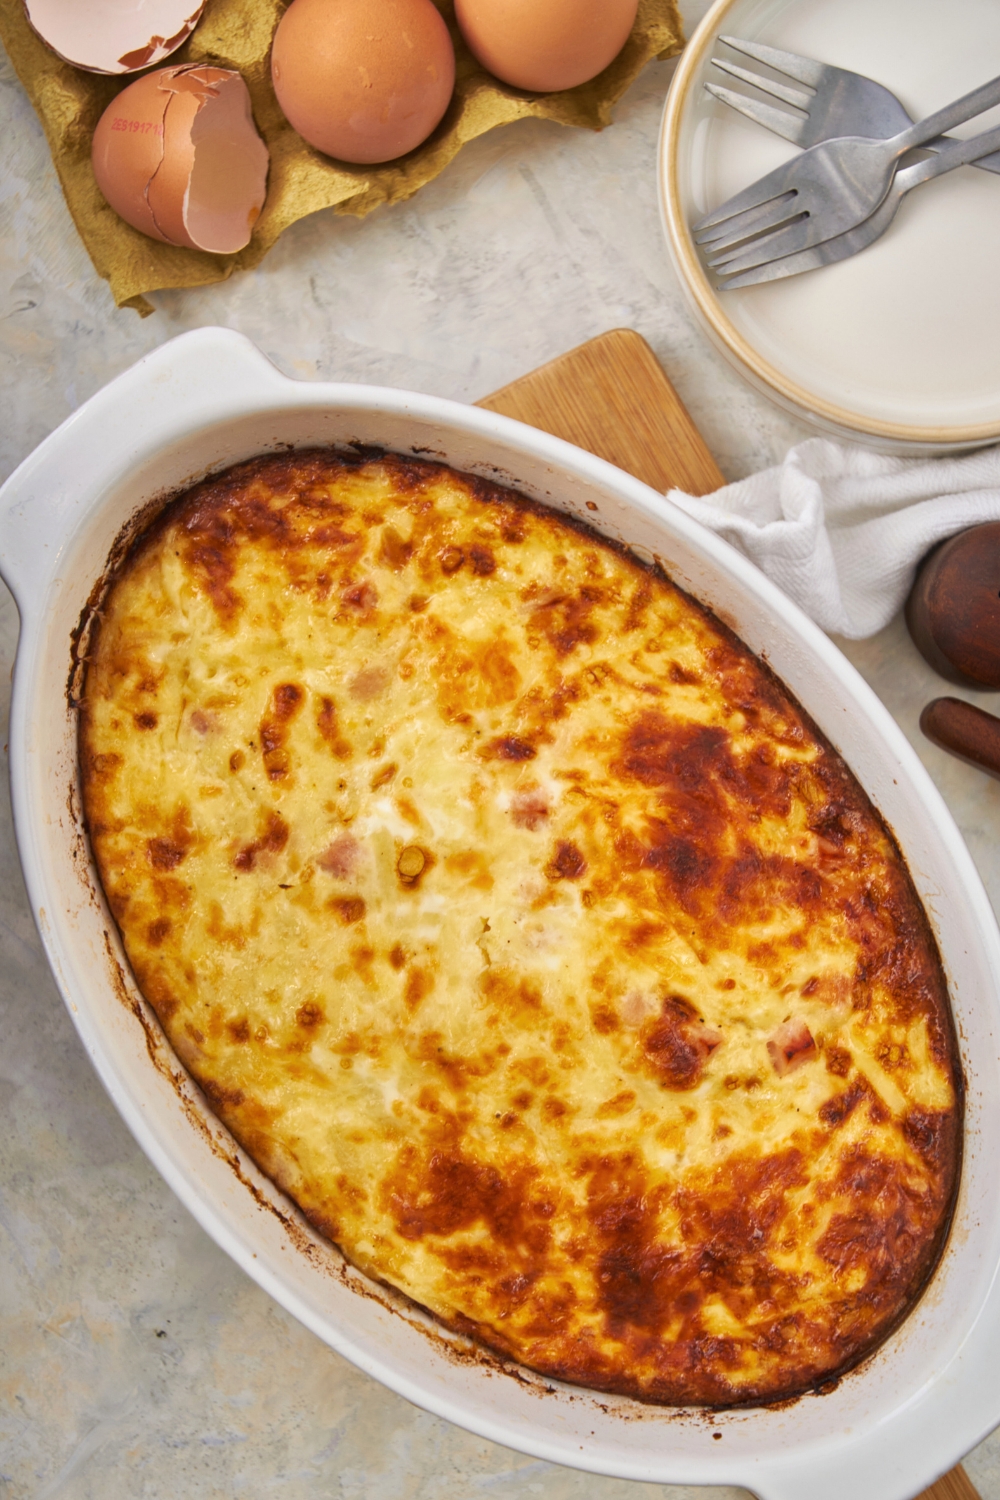 A breakfast casserole with ham and cheese in a casserole dish.